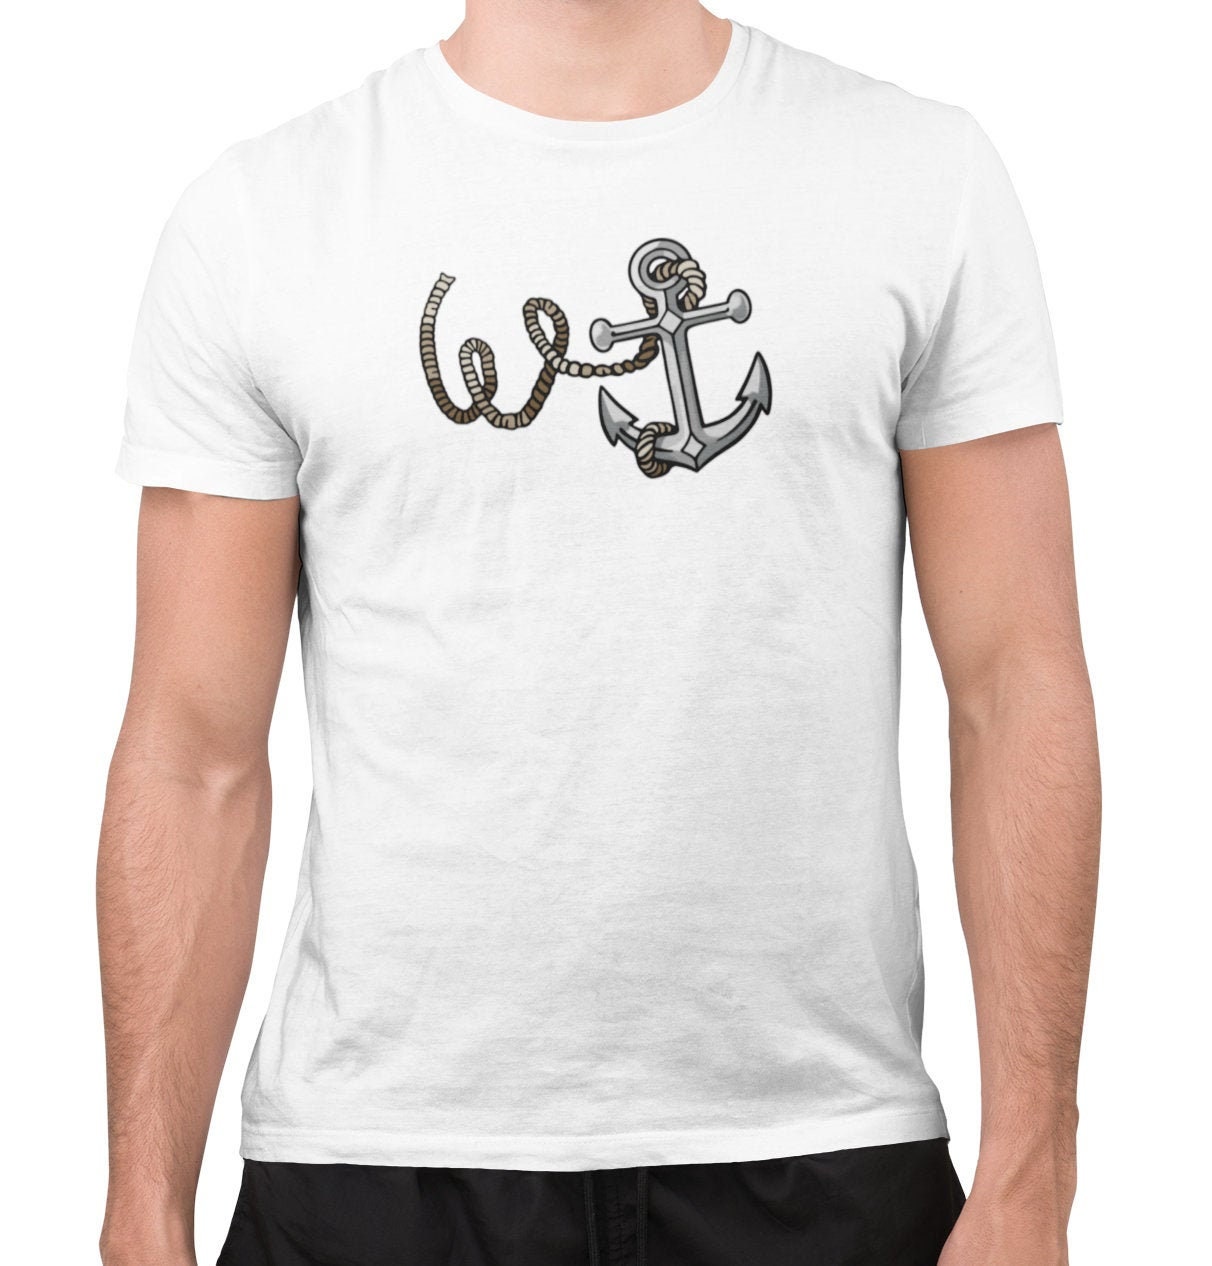 W-anchor Graphic Tshirt Cotton Tee Rude Gifts for -